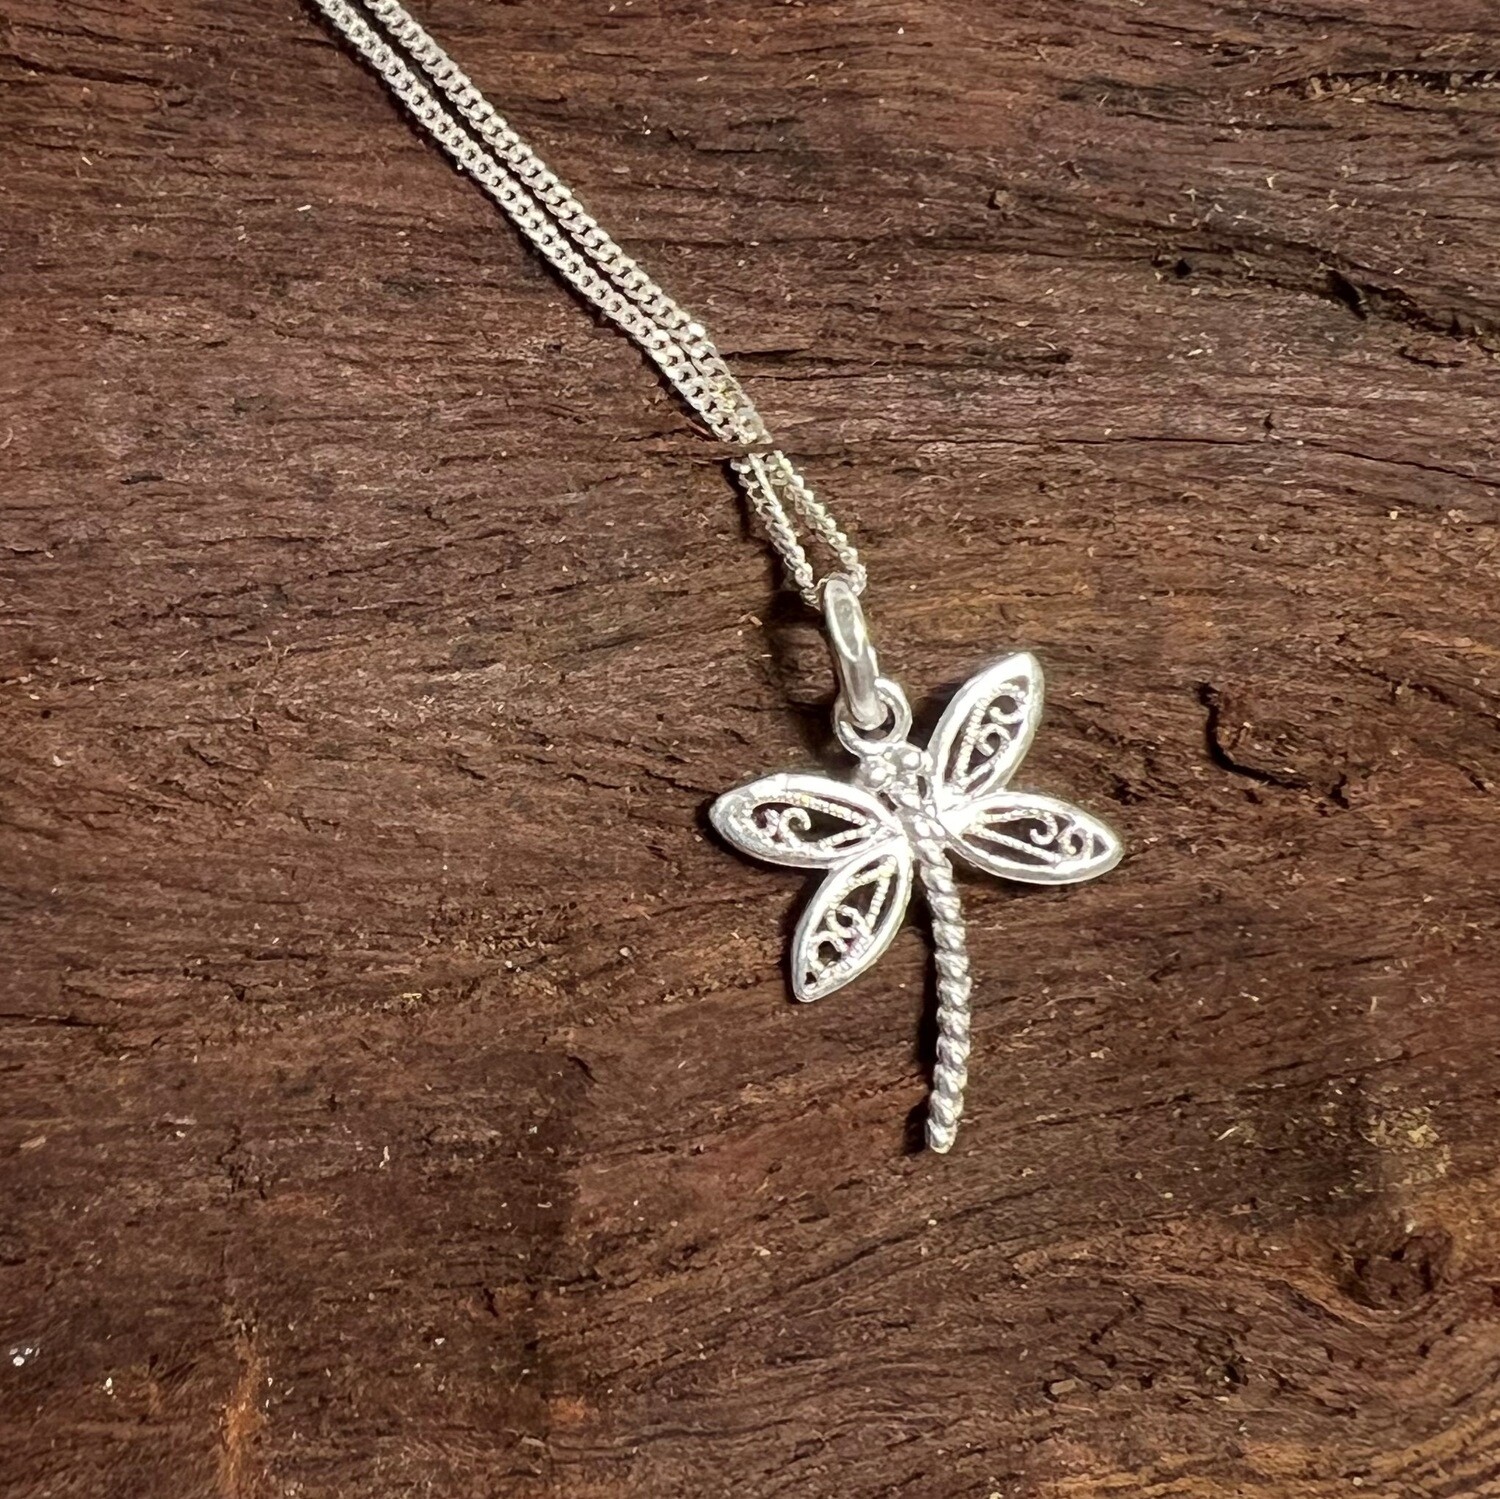 Dragonfly pendant and necklace